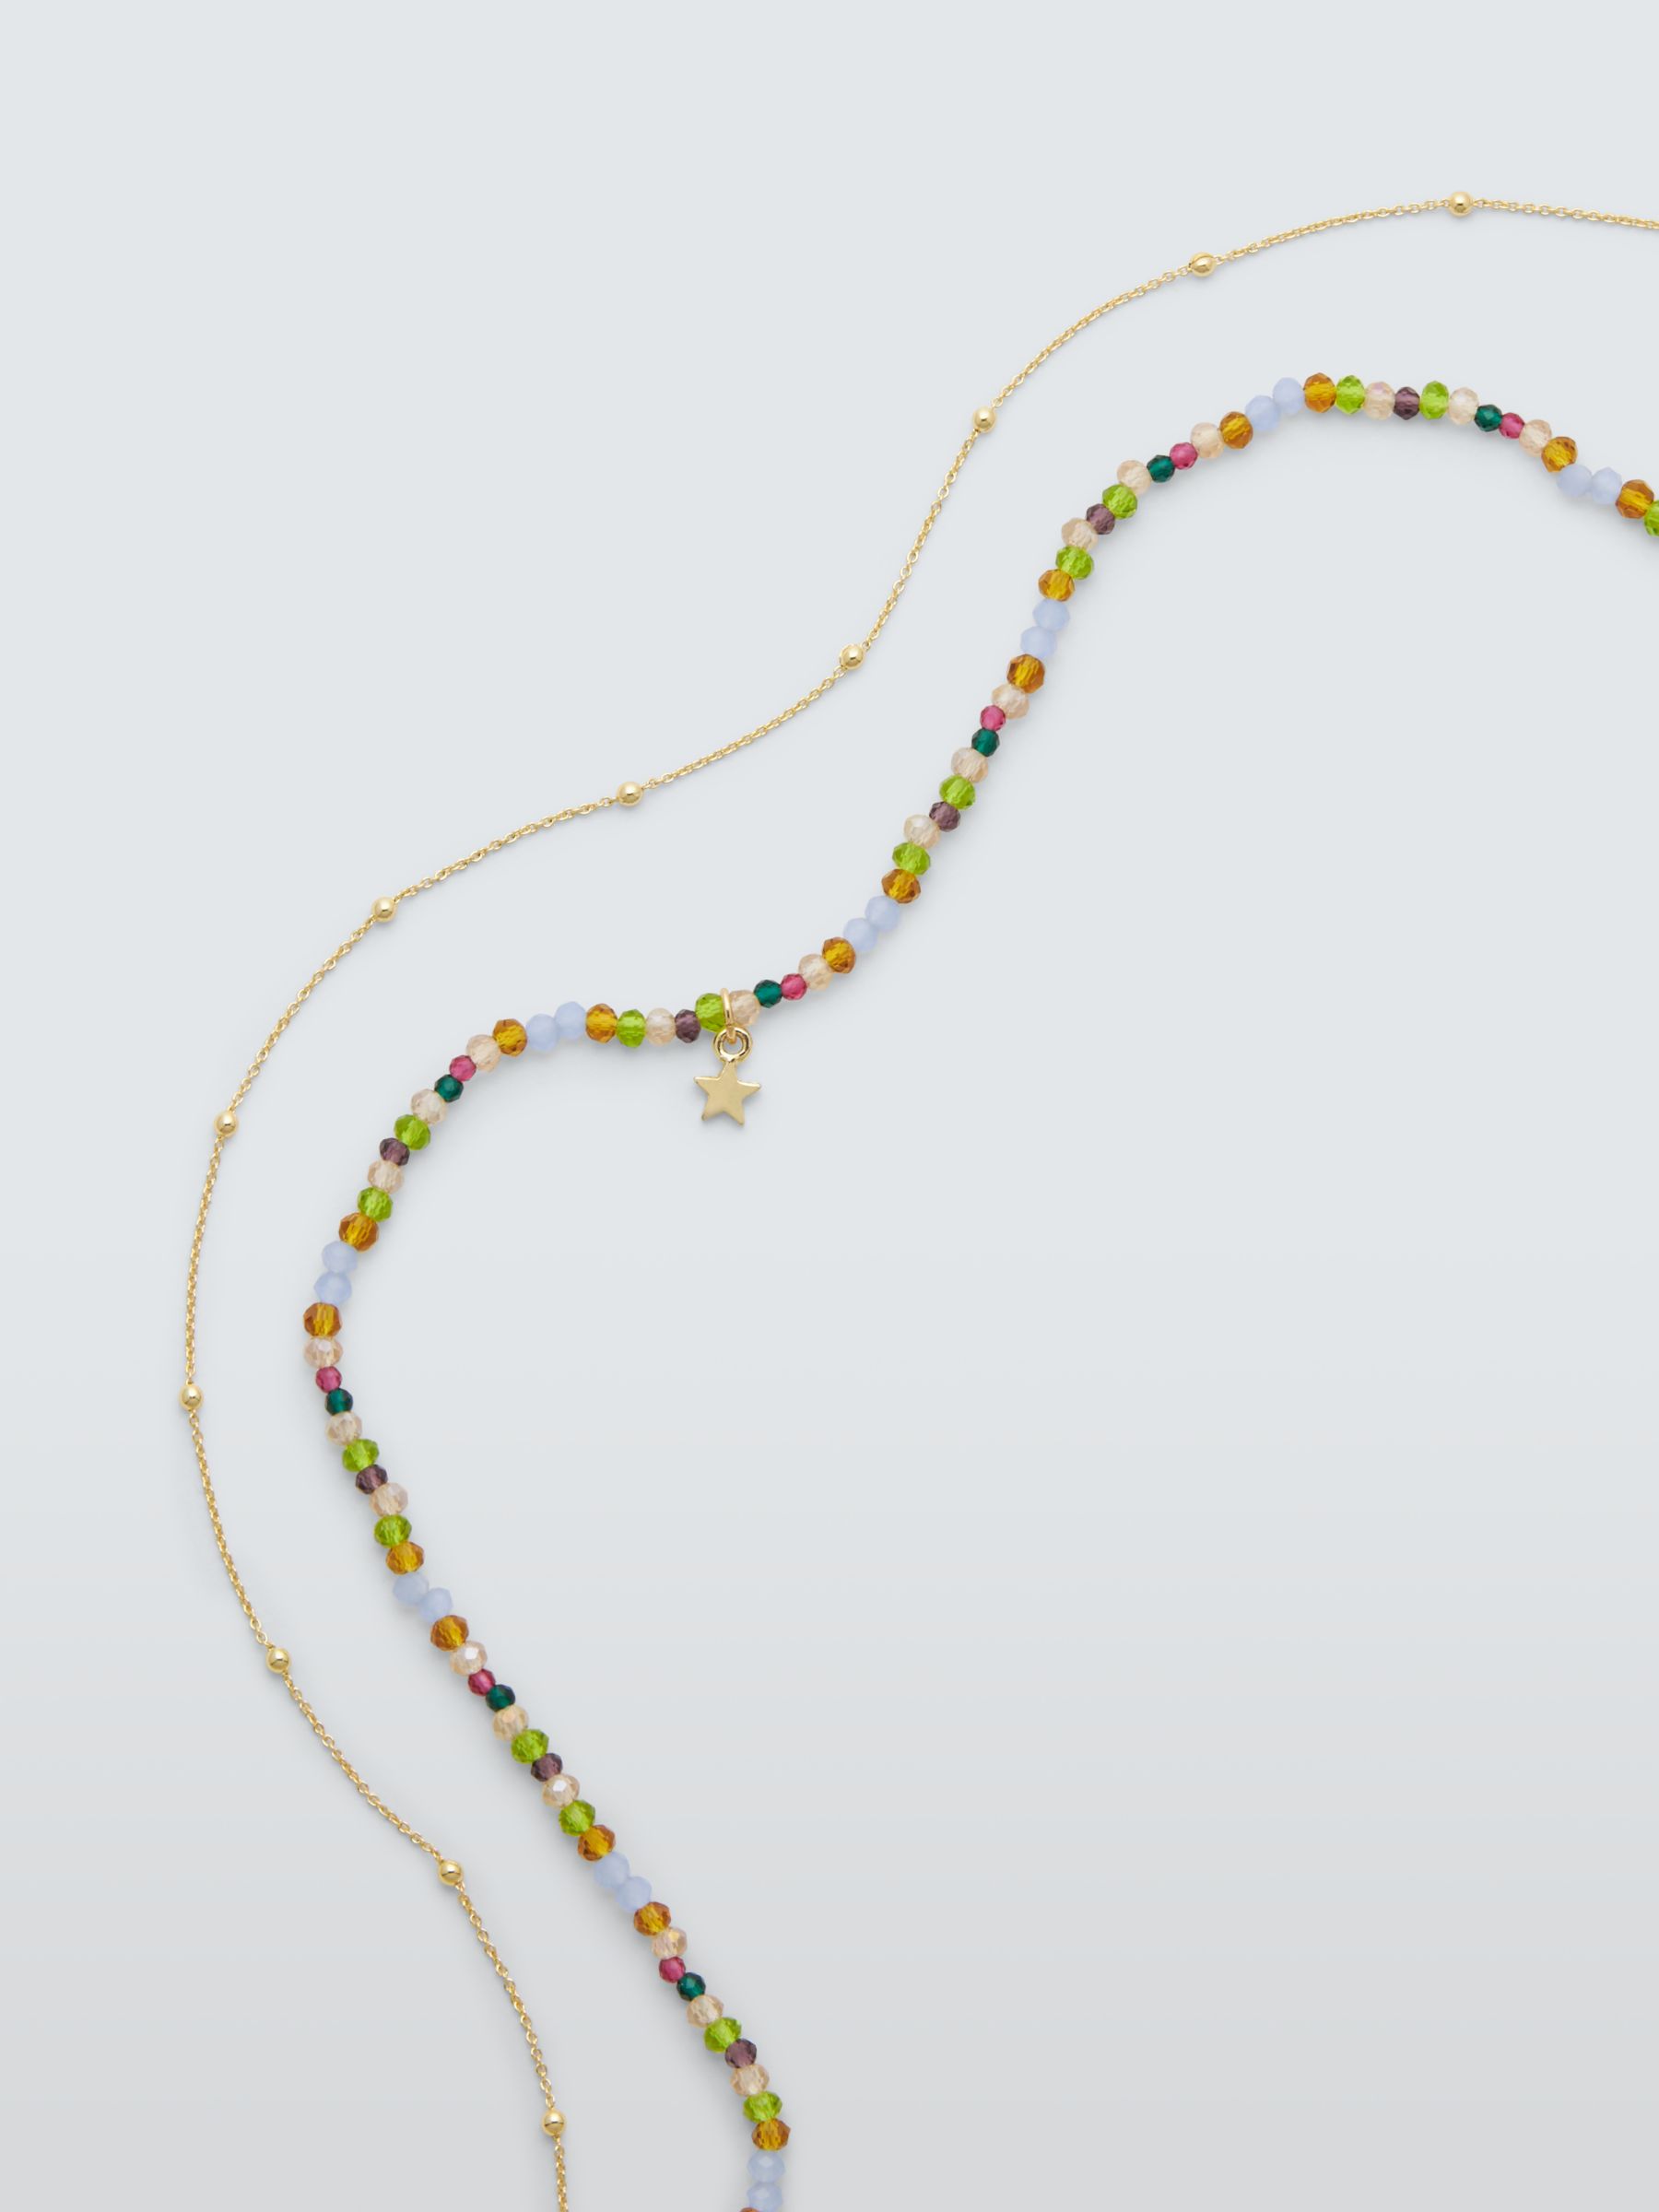 Buy John Lewis Bead and Chain Layered Necklace, Multi Online at johnlewis.com